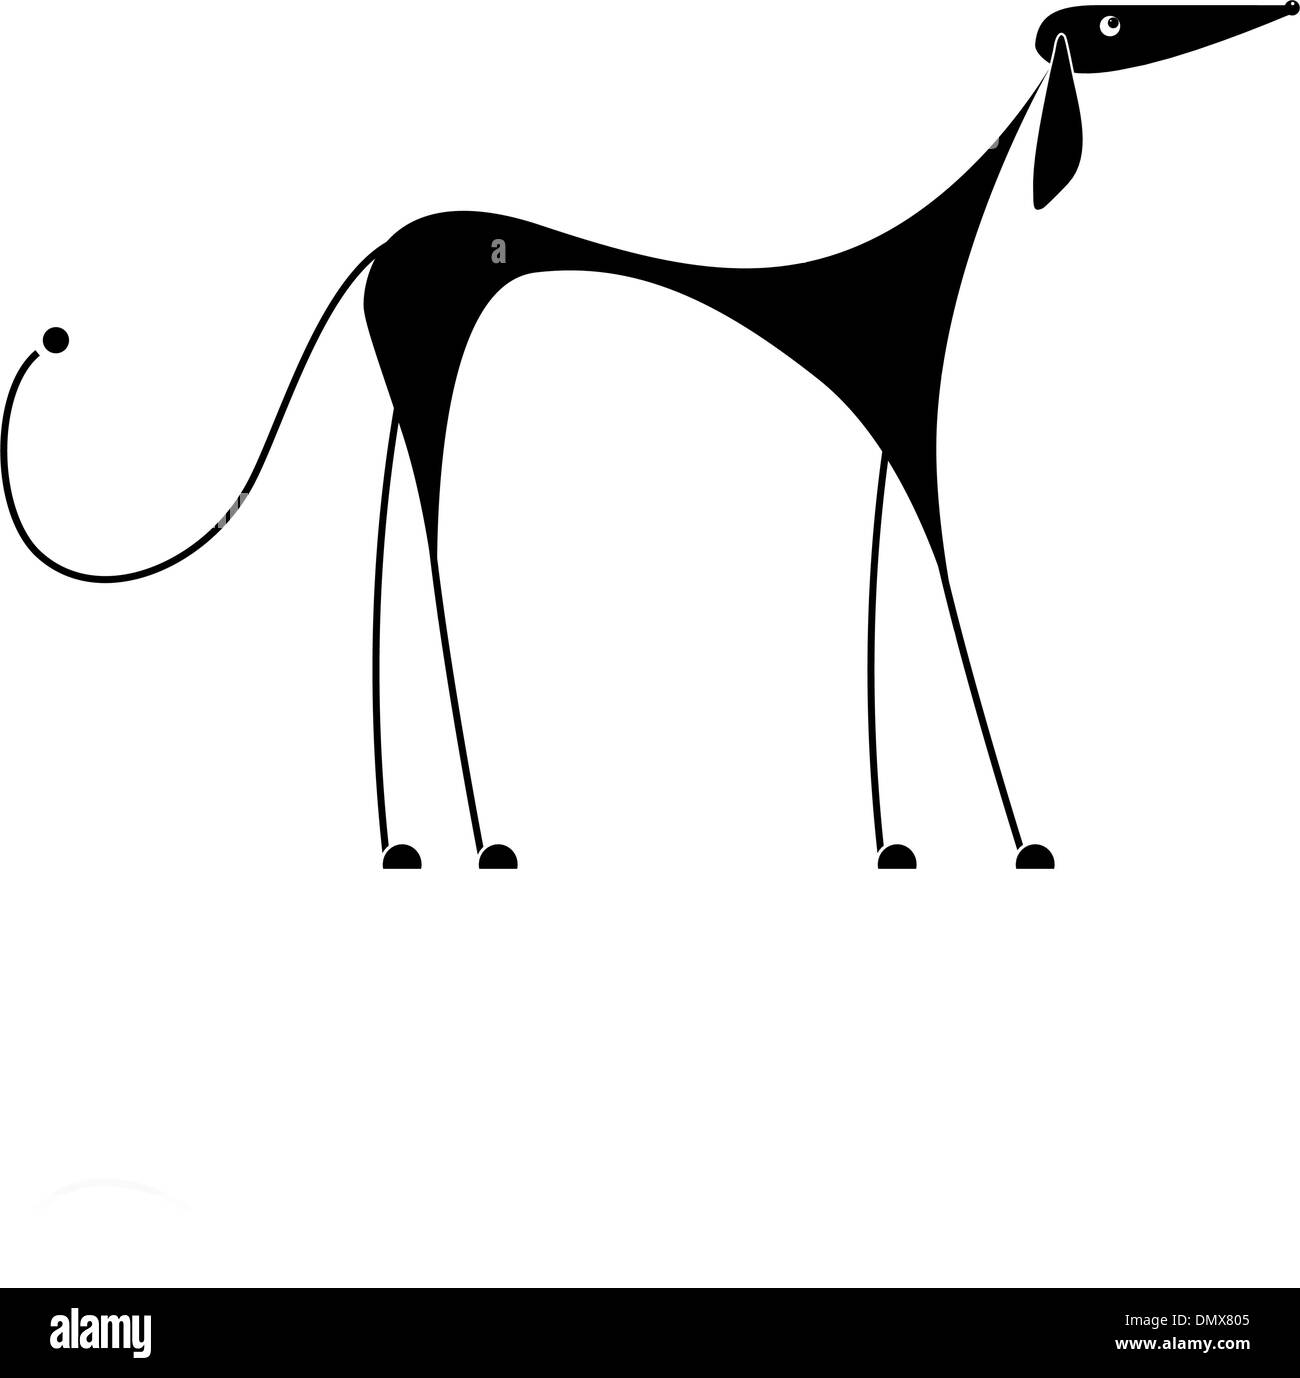 Funny black dog silhouette for your design Stock Vector